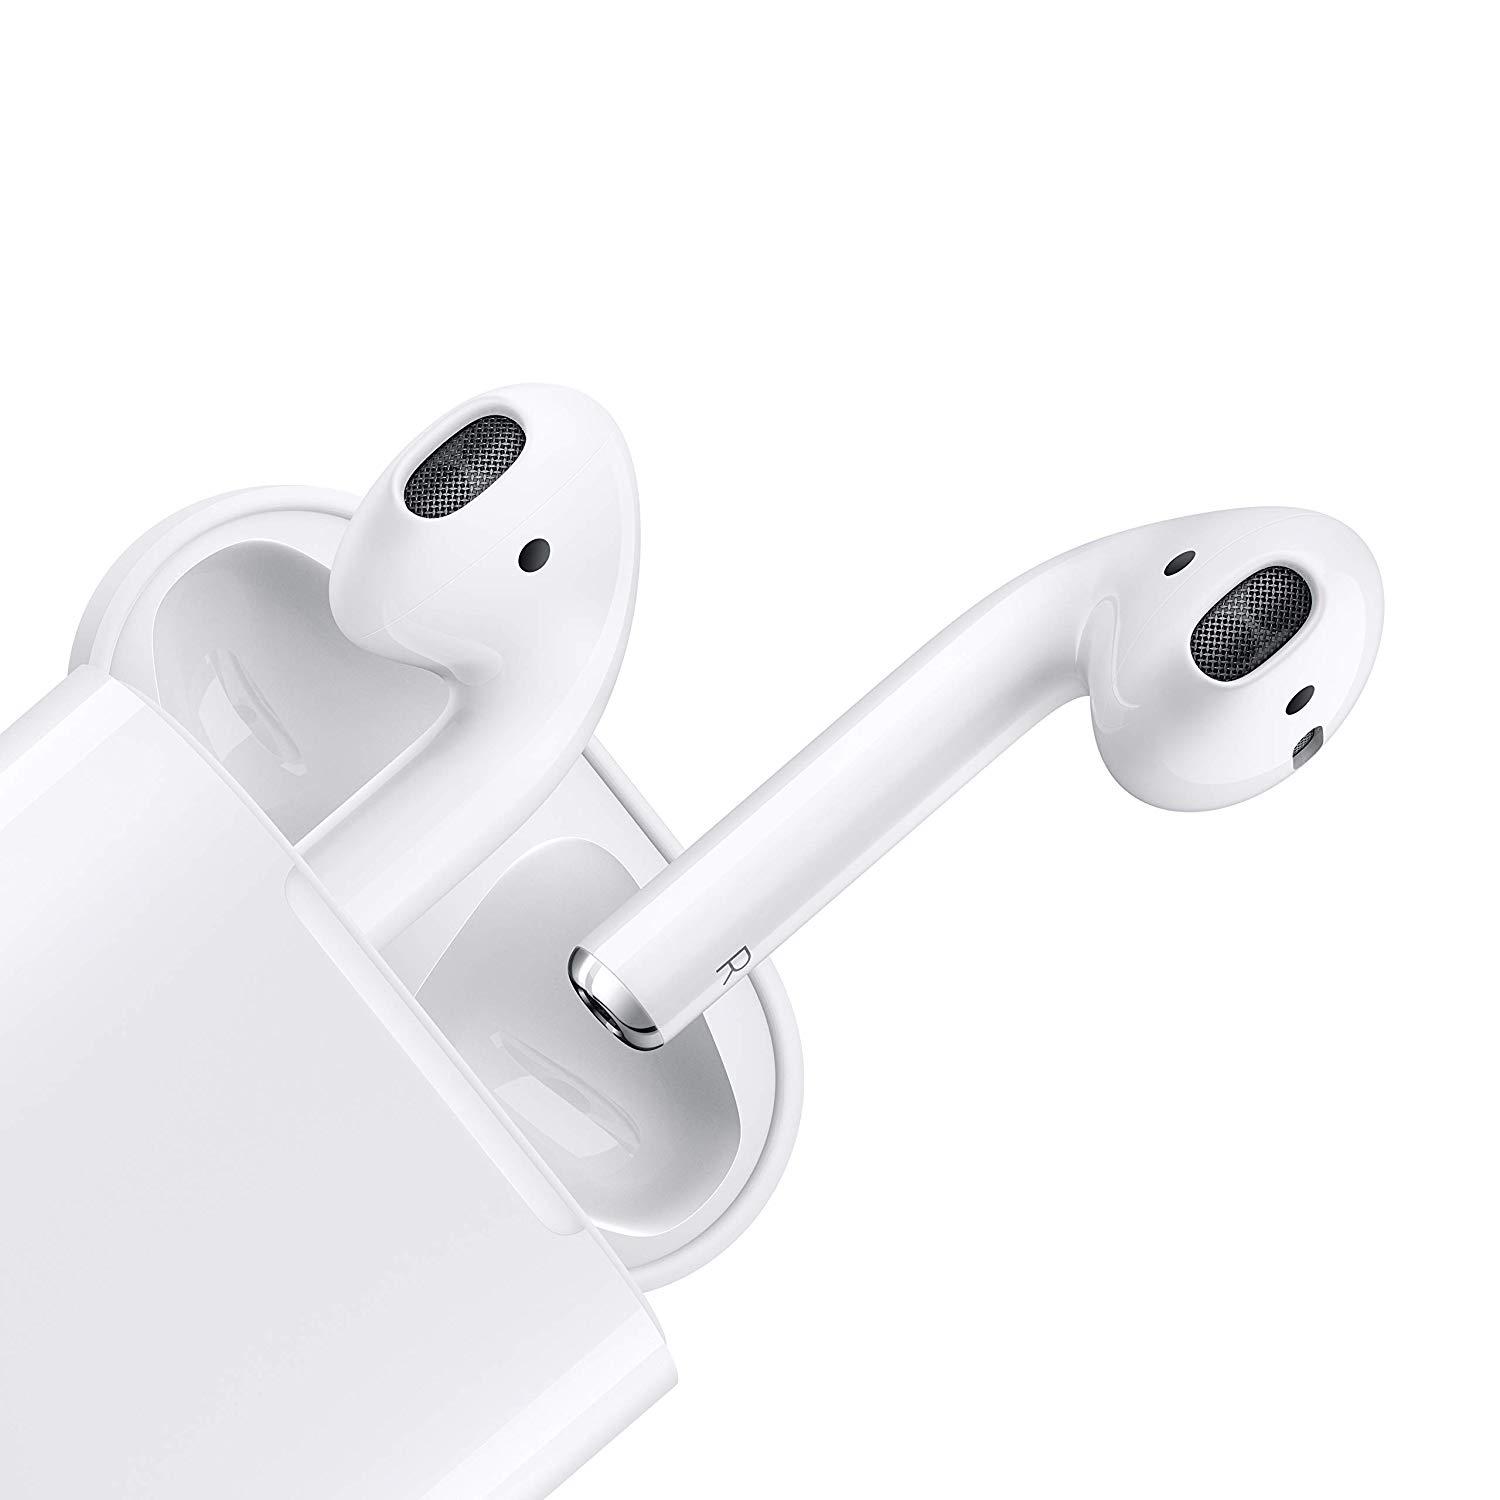 Apple AirPods with Charging Case - 2nd Generation, White (Refurbished)